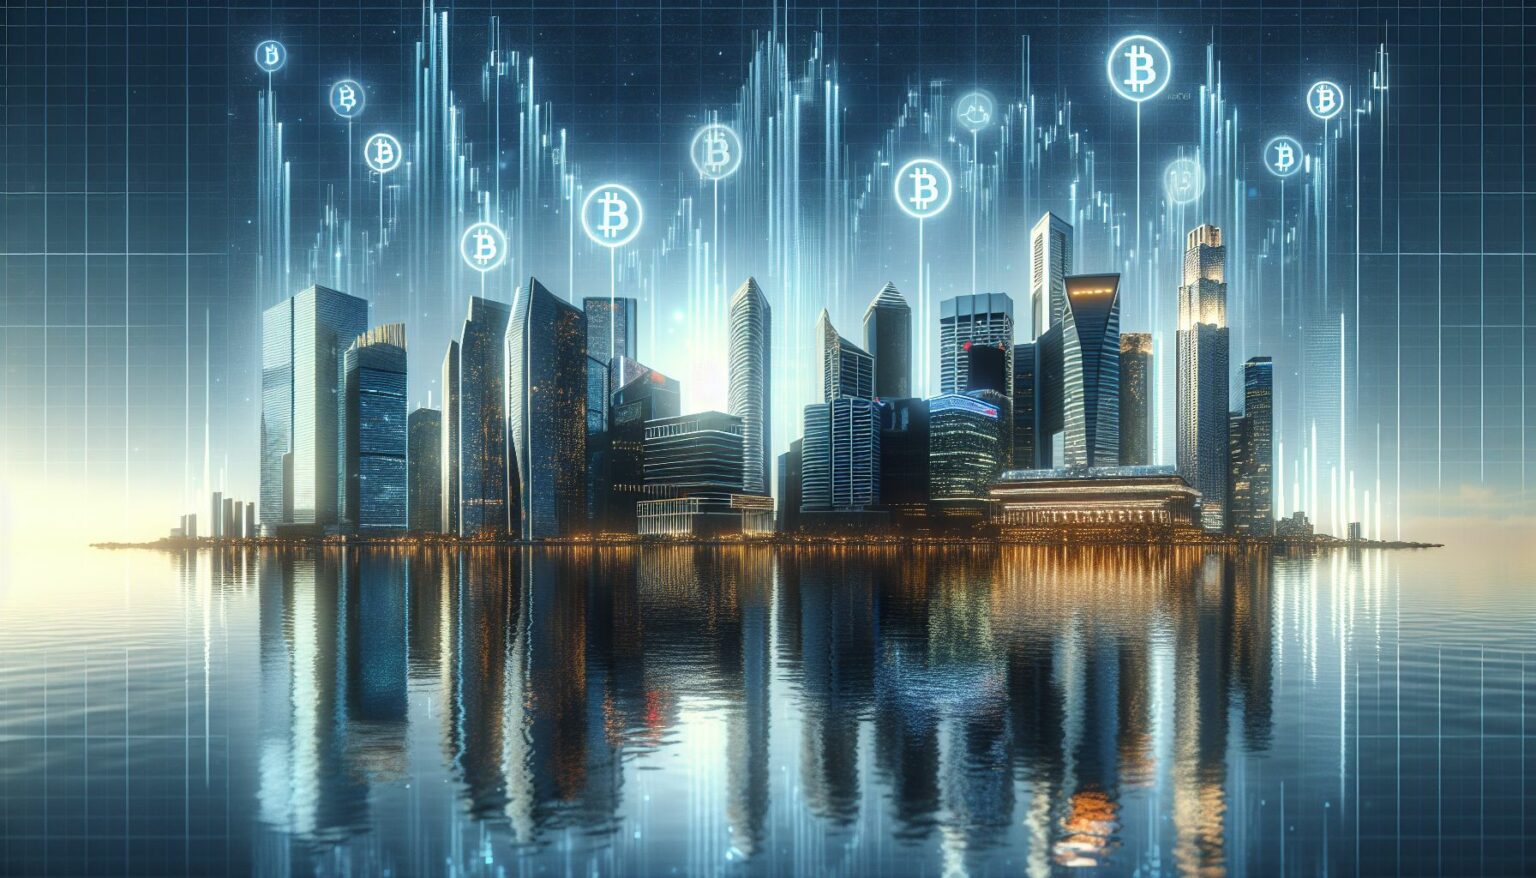 futuristic city skyline with cryptocurrency symbols and stock market graphs